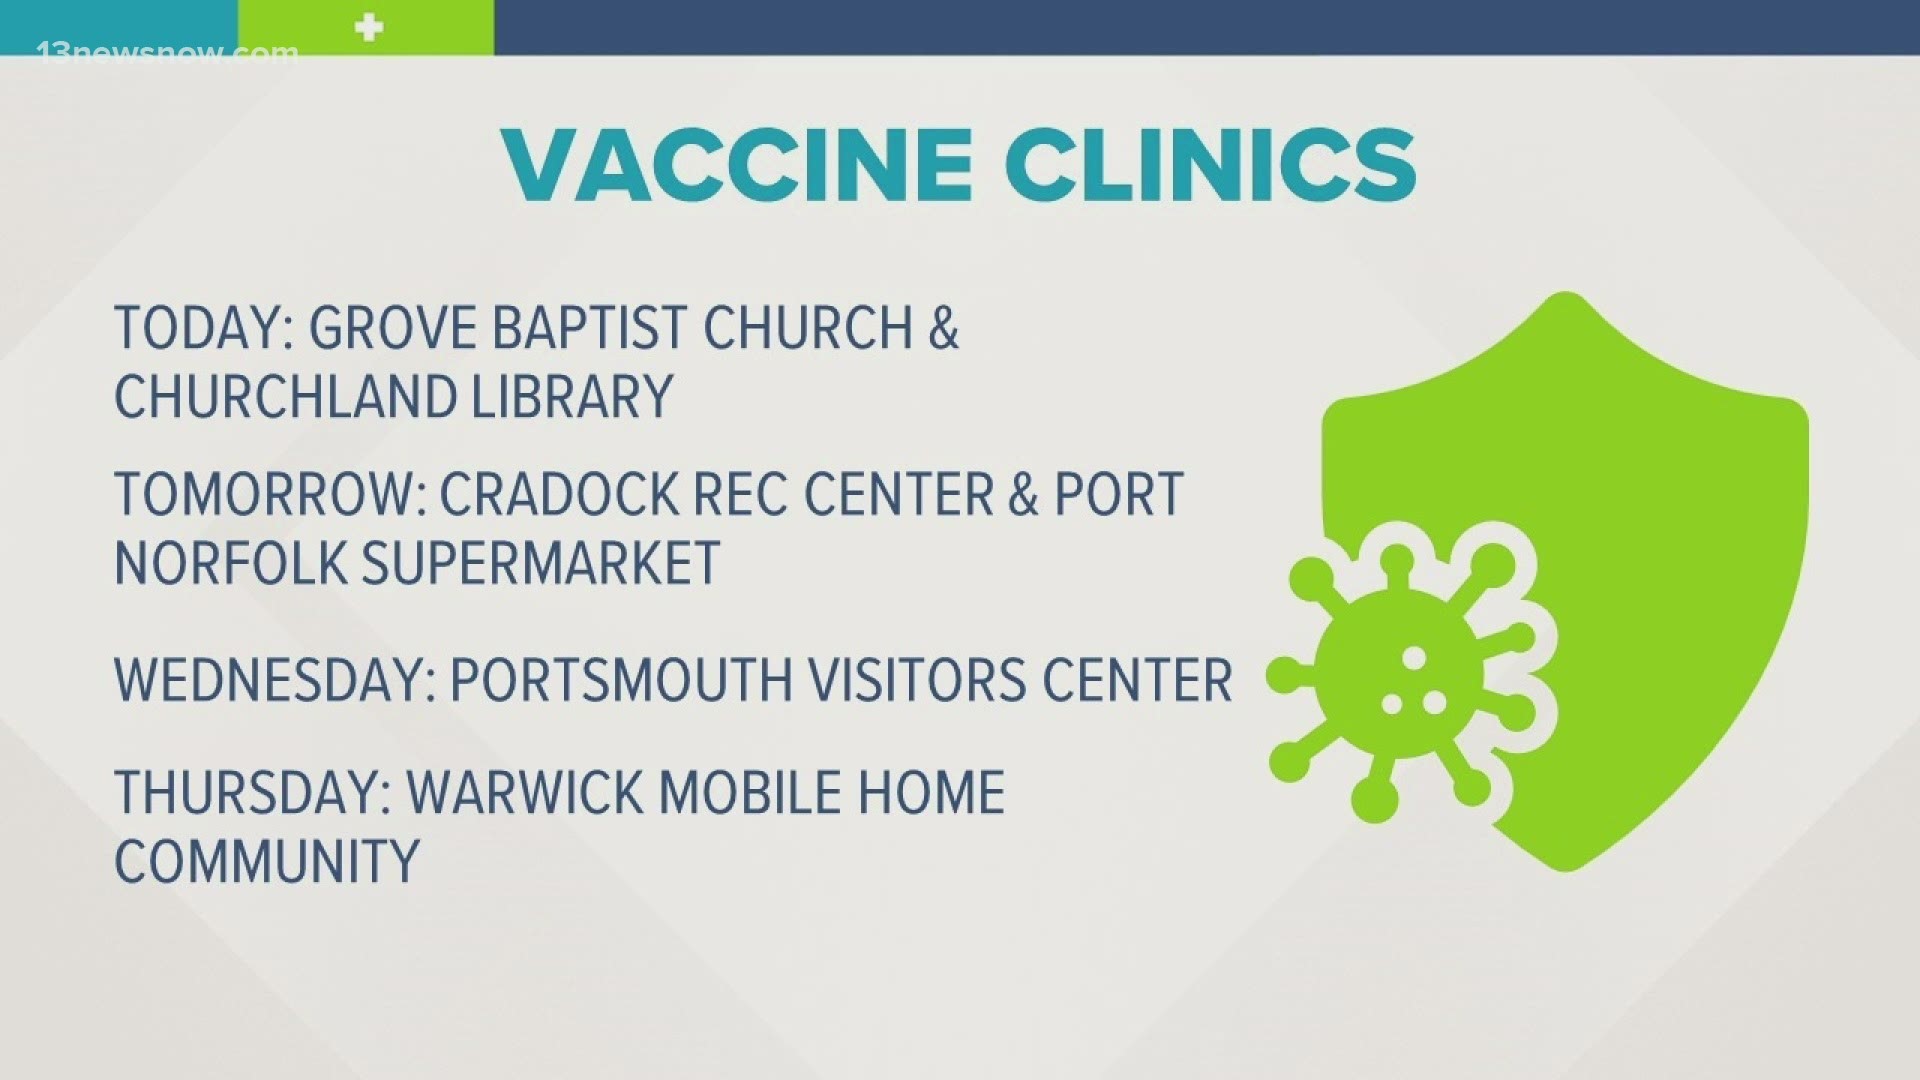 From June 7 through June 10, Virginians will be able to head to the locations in Portsmouth and Newport News to get the free, one-dose, Johnson & Johnson vaccine.